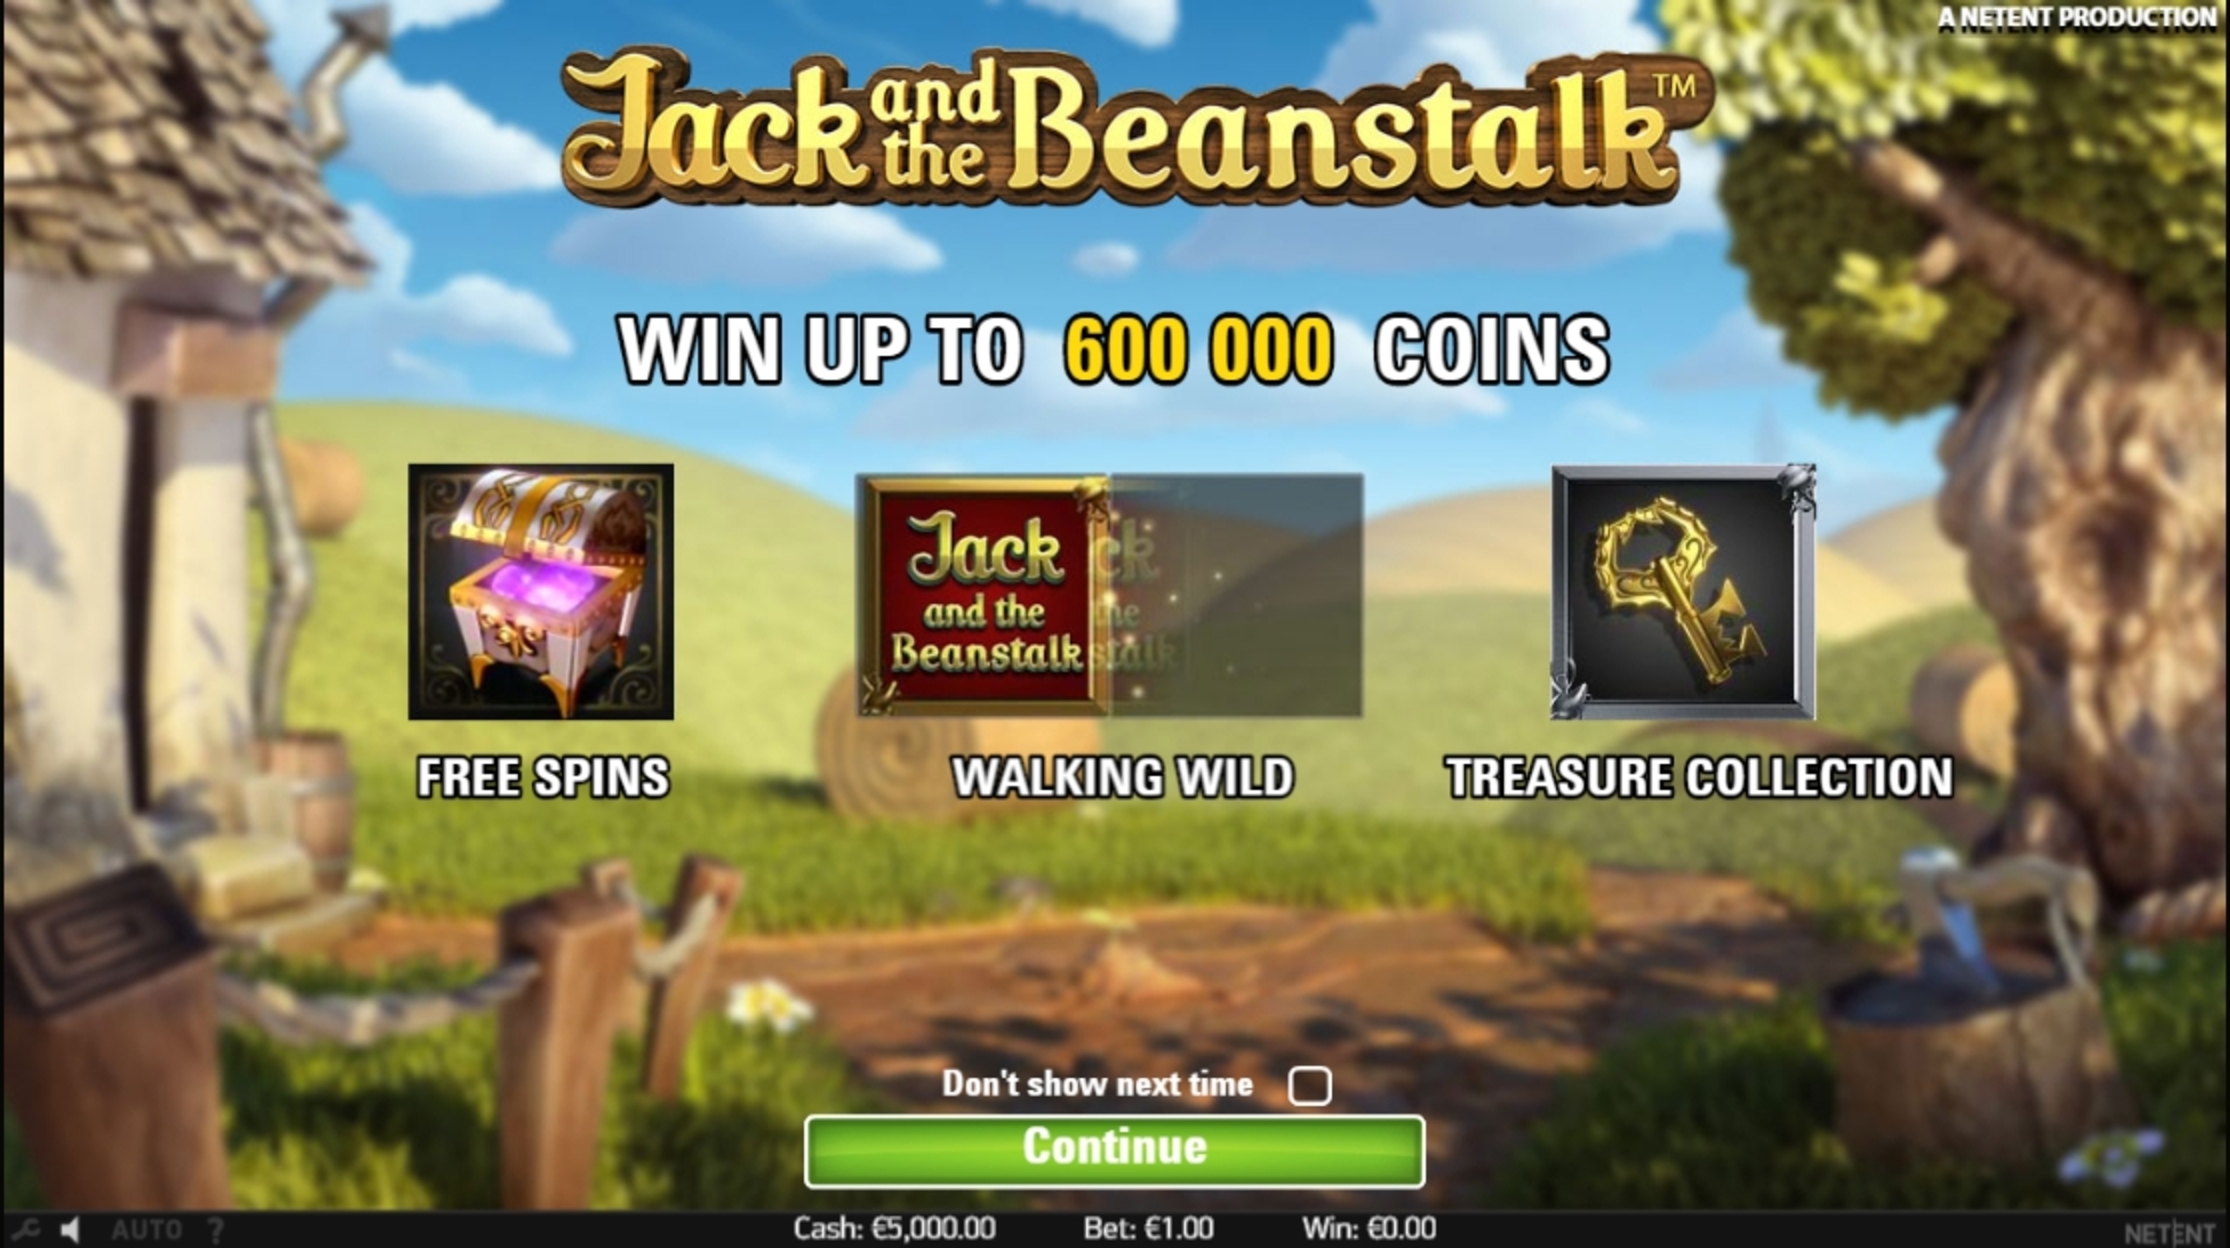 Play Jack and the Beanstalk Free Casino Slot Game by NetEnt